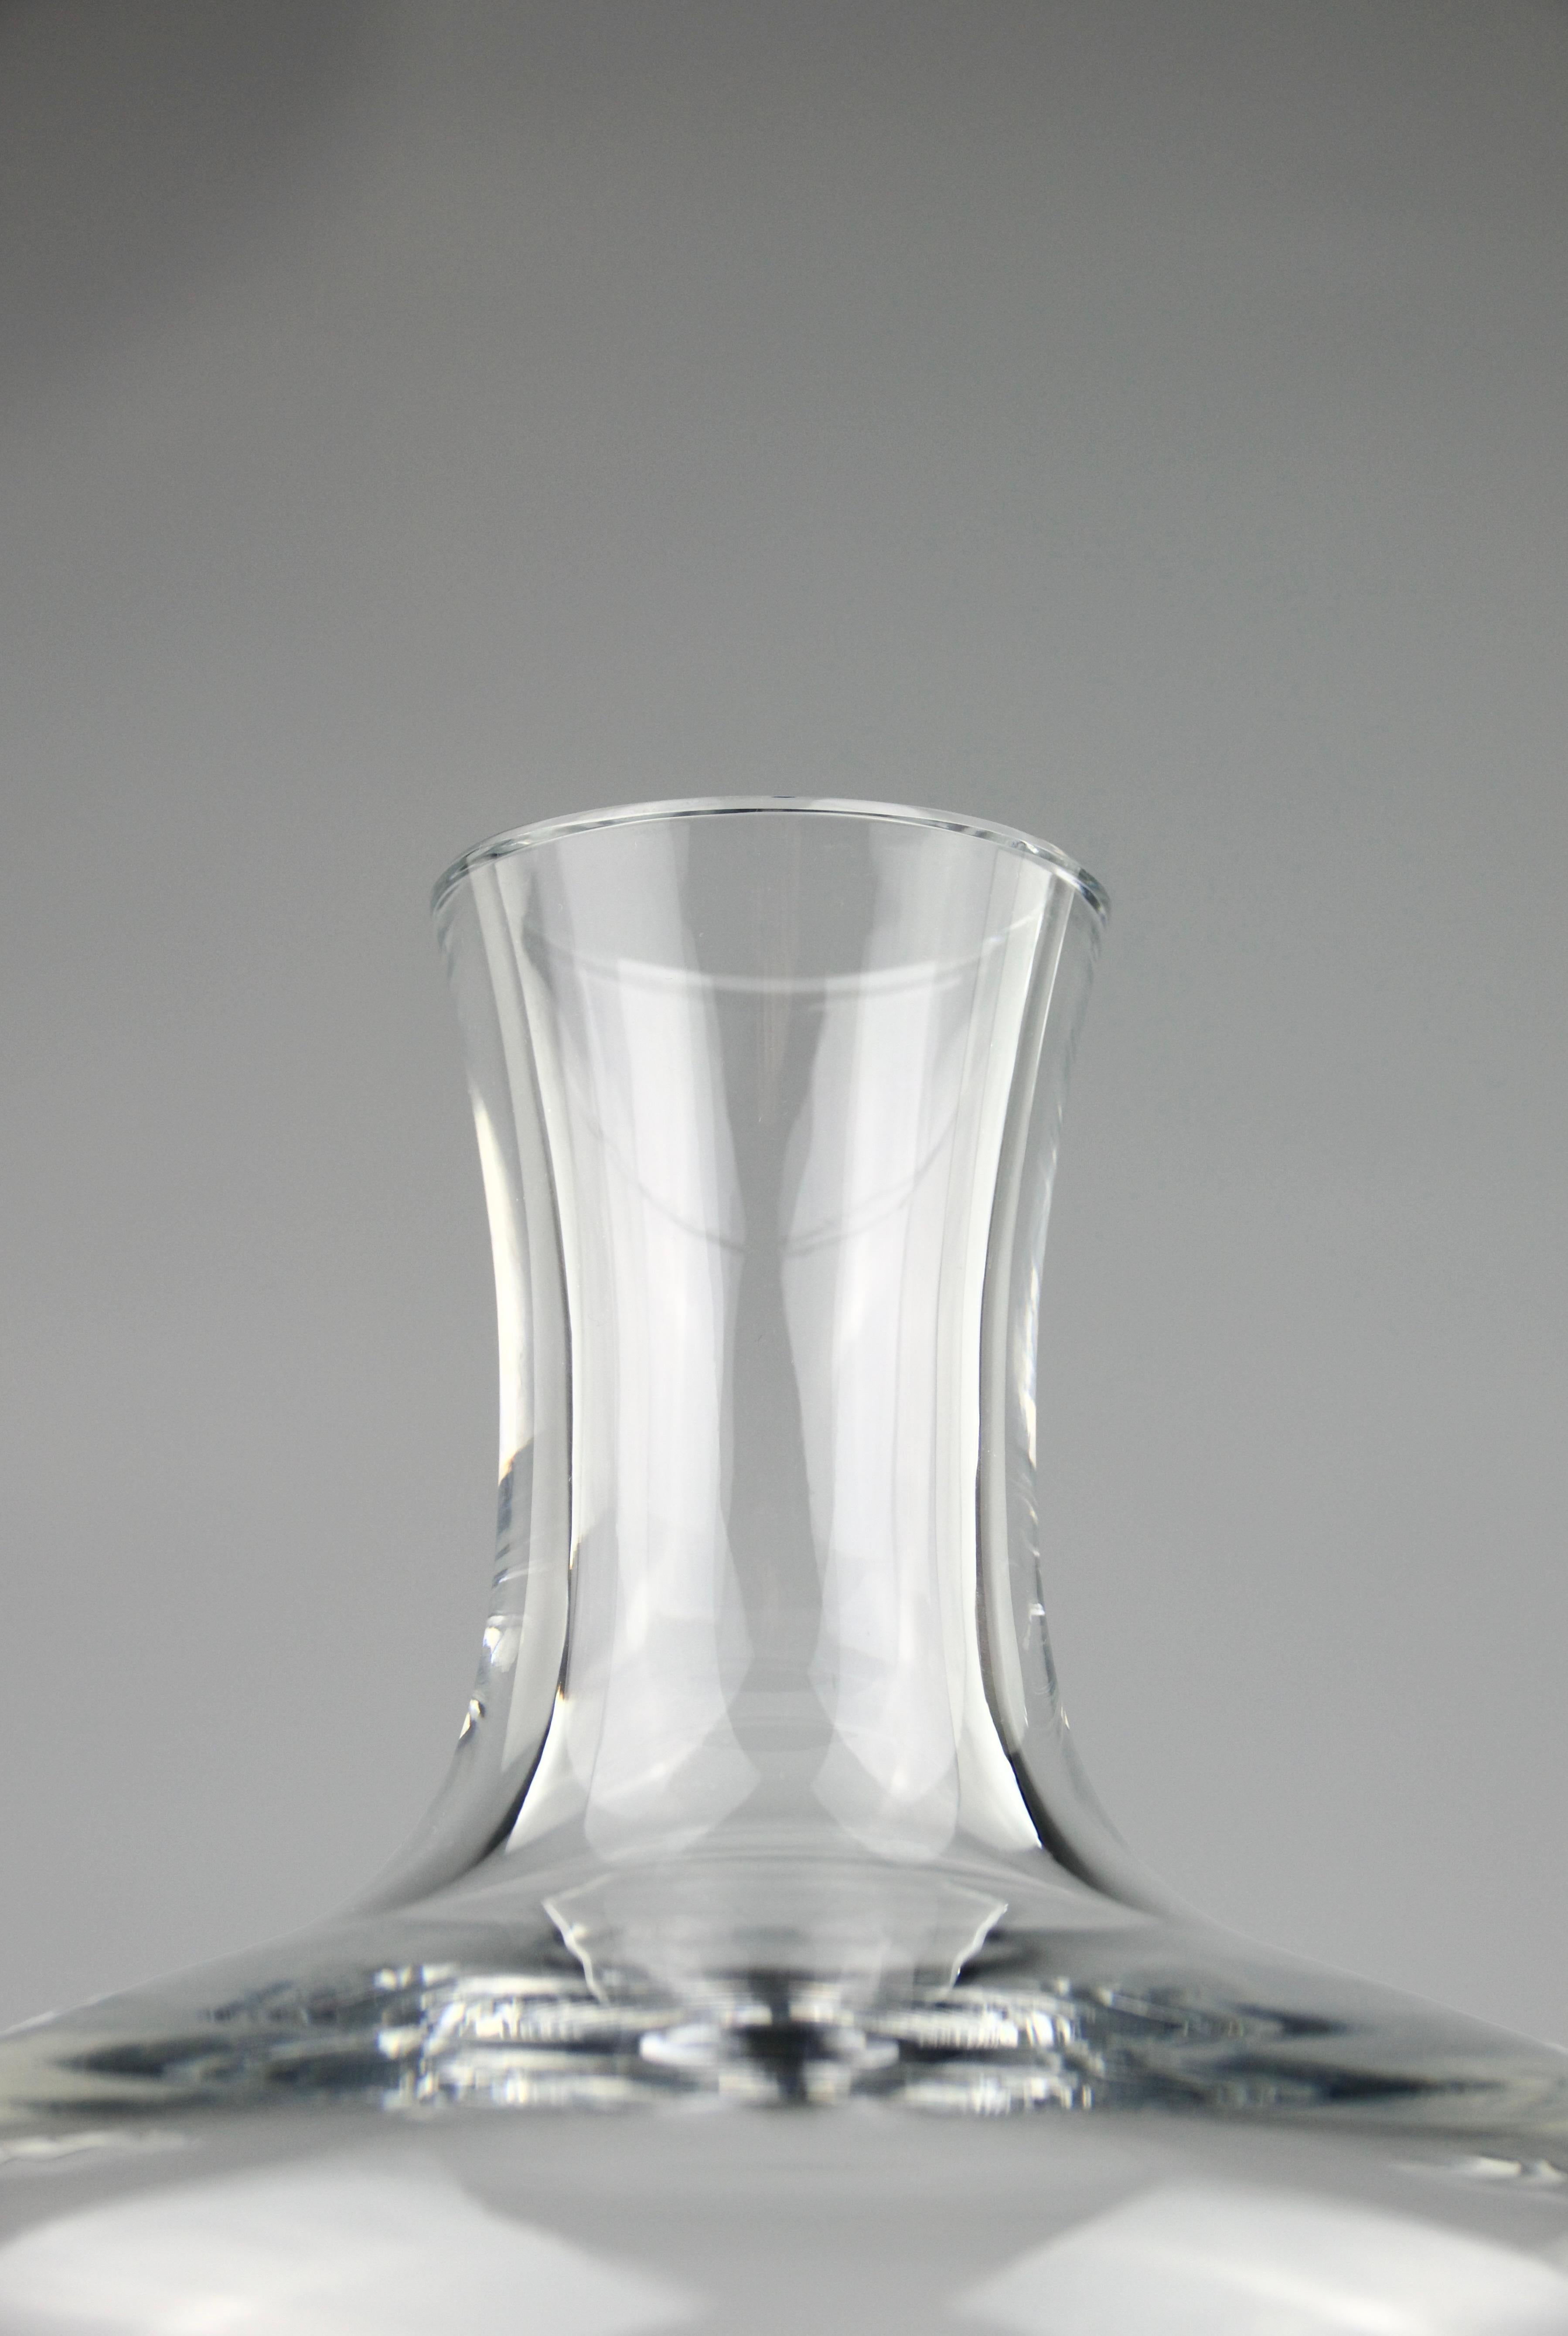 Baccarat crystal wine decanter. Stamped by the manufacture.

In very good condition.

Dimensions in cm ( H x D ) : 18 x 21

Secure shipping.

Since 1764 Baccarat has written the chapters of its remarkable history in sparkling letters.